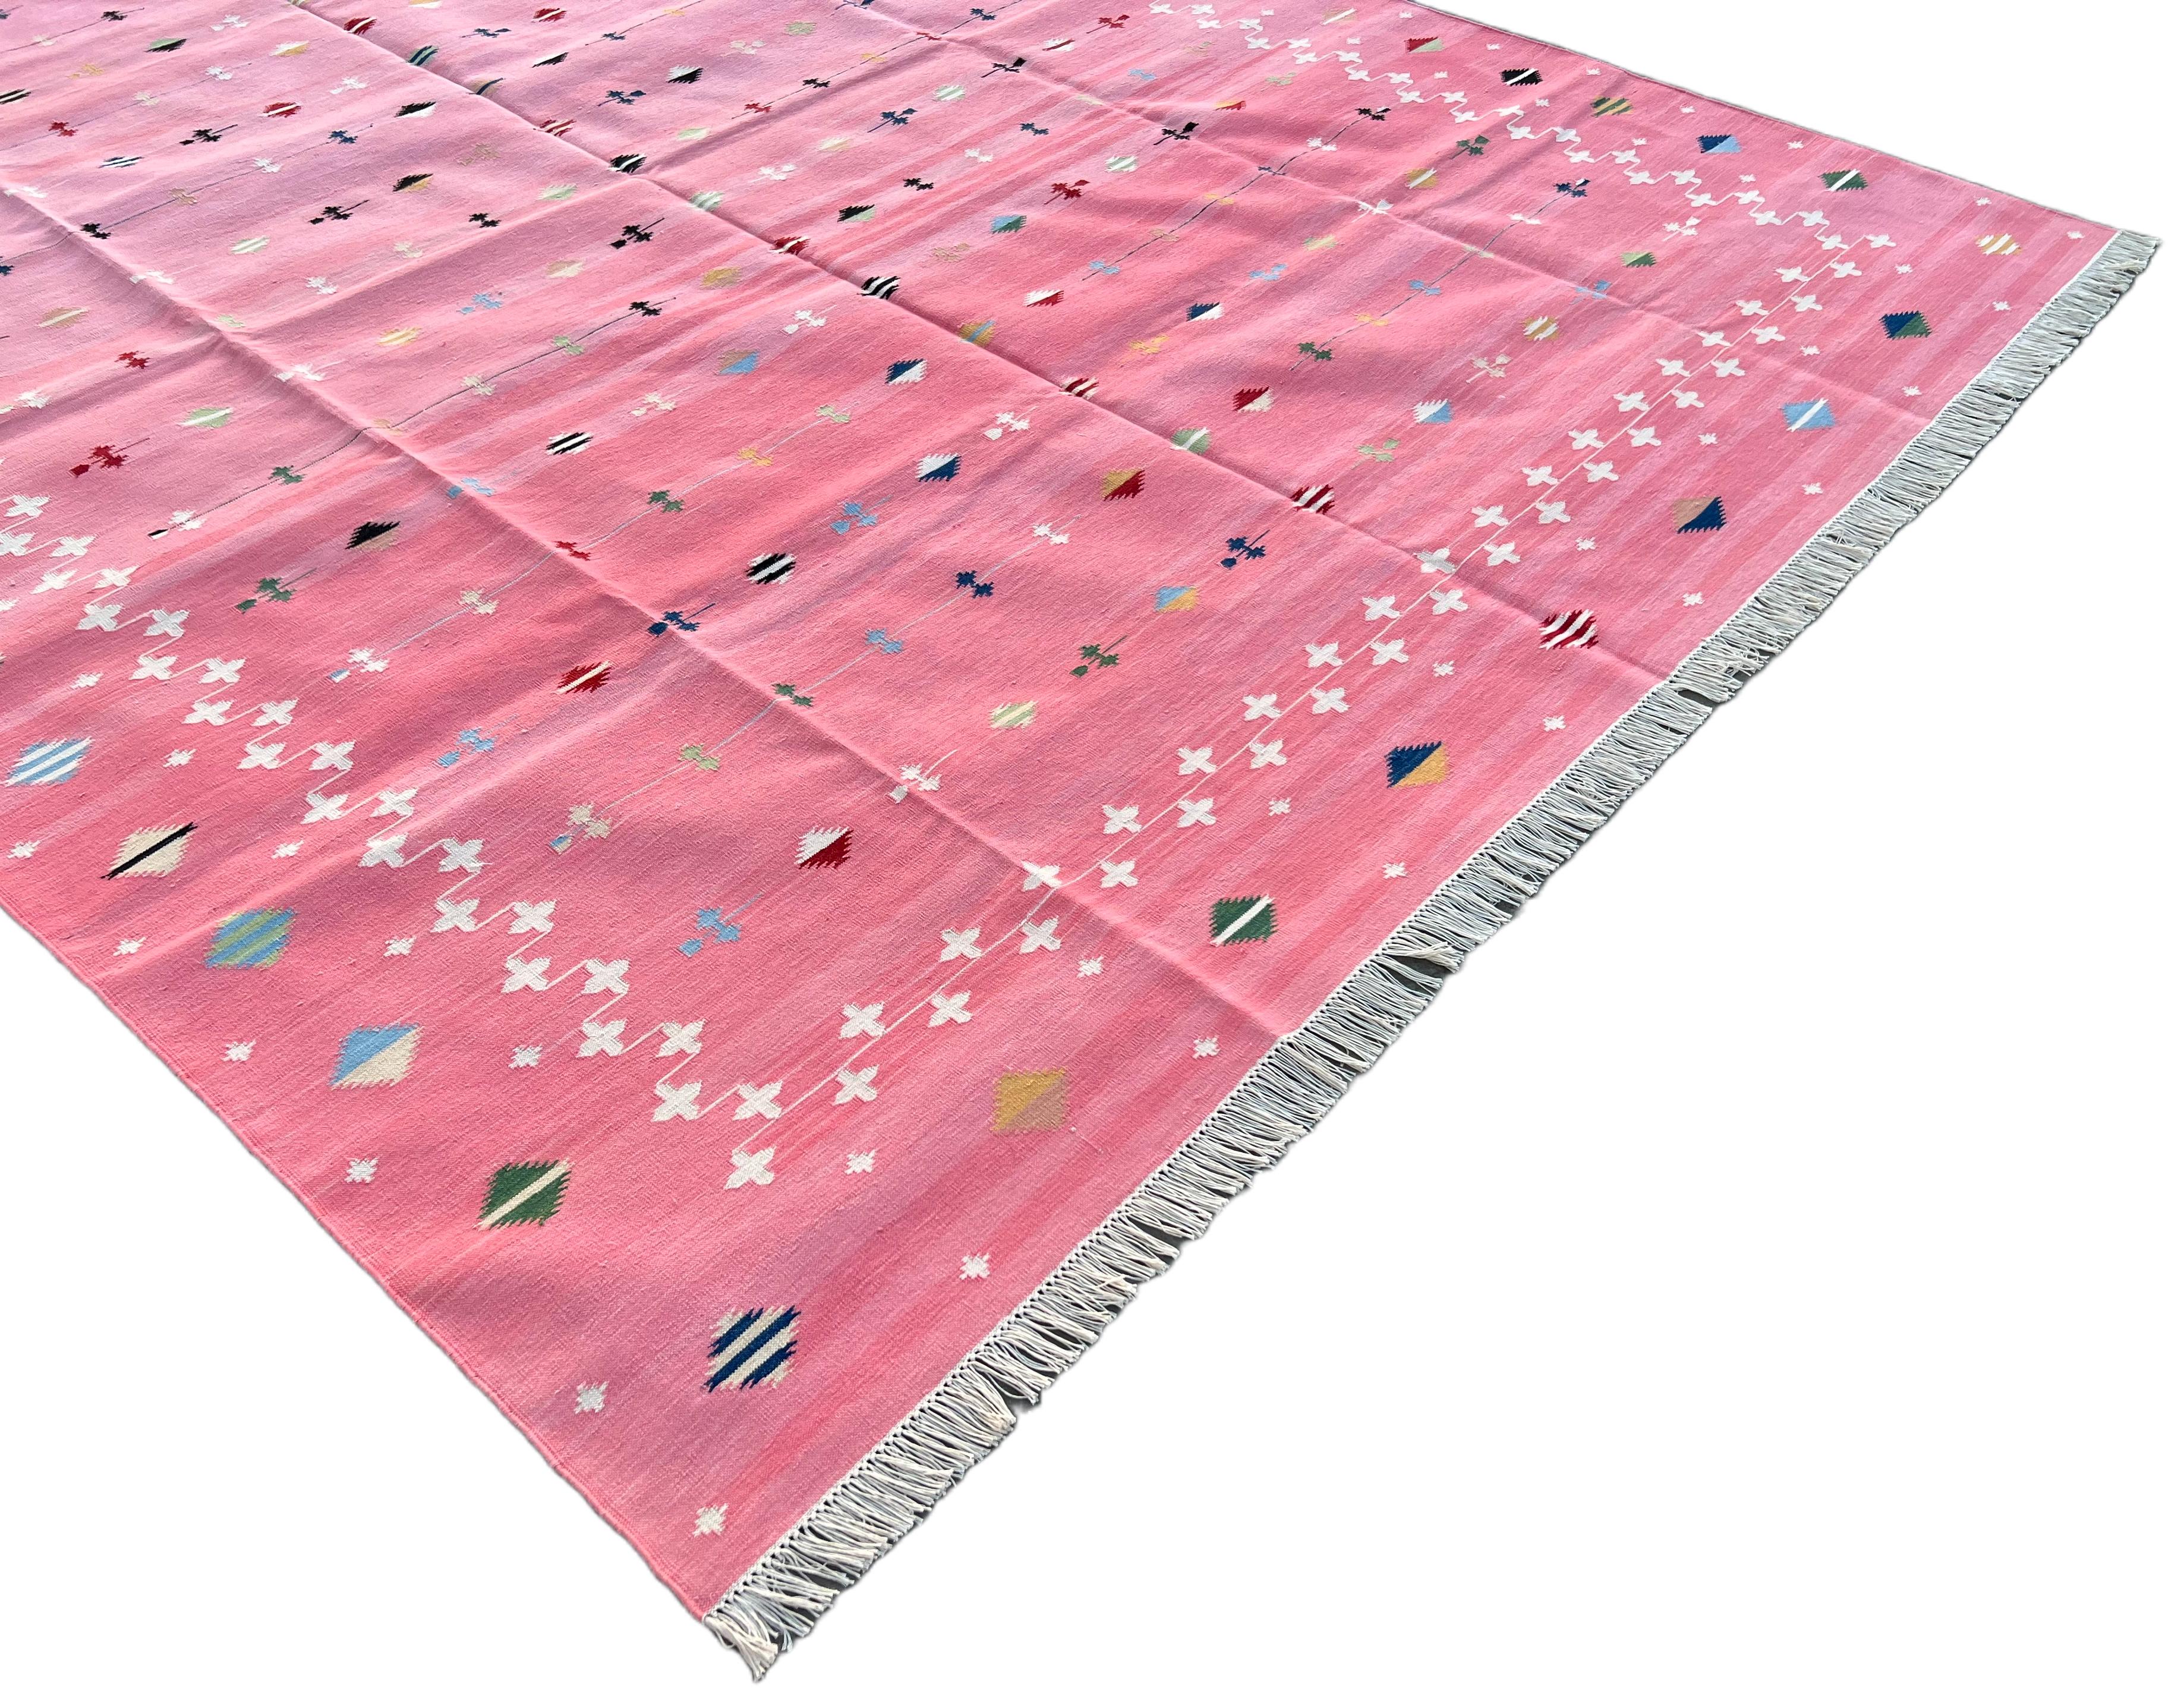 Handmade Cotton Area Flat Weave Rug, 8x10 Pink And White Shooting Star Dhurrie In New Condition For Sale In Jaipur, IN